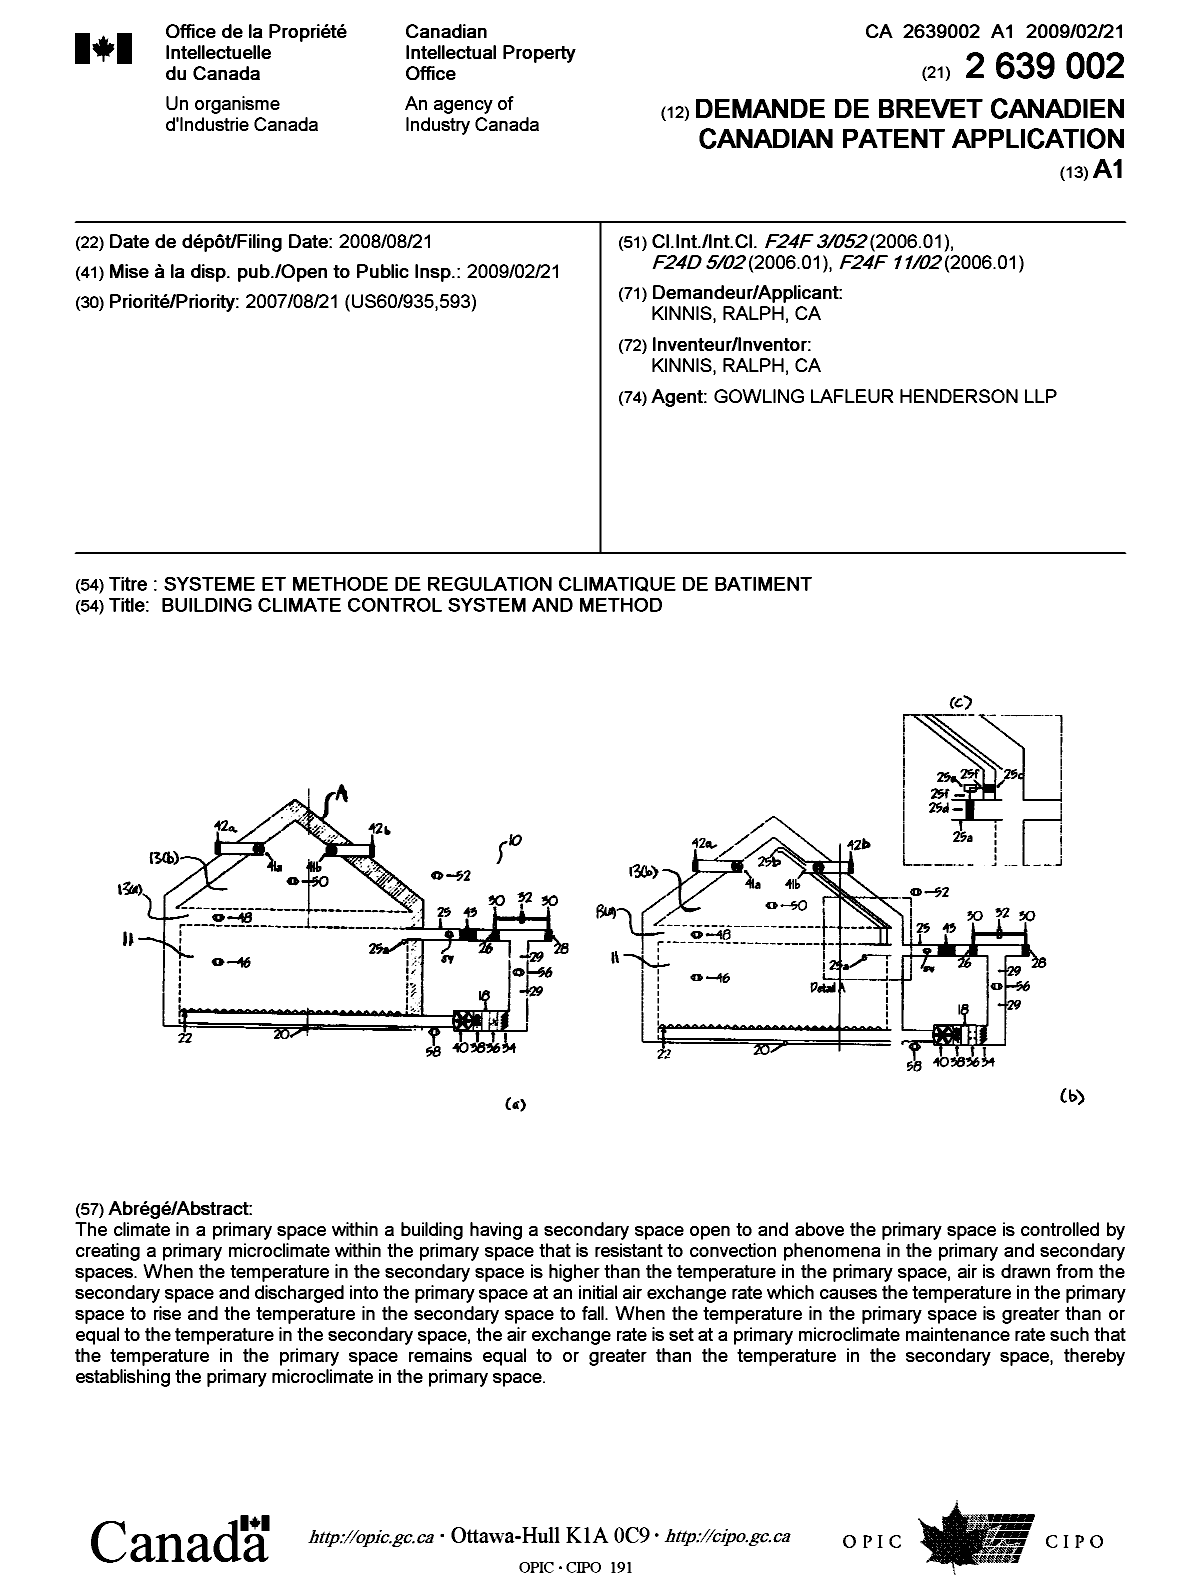 Canadian Patent Document 2639002. Cover Page 20090130. Image 1 of 1